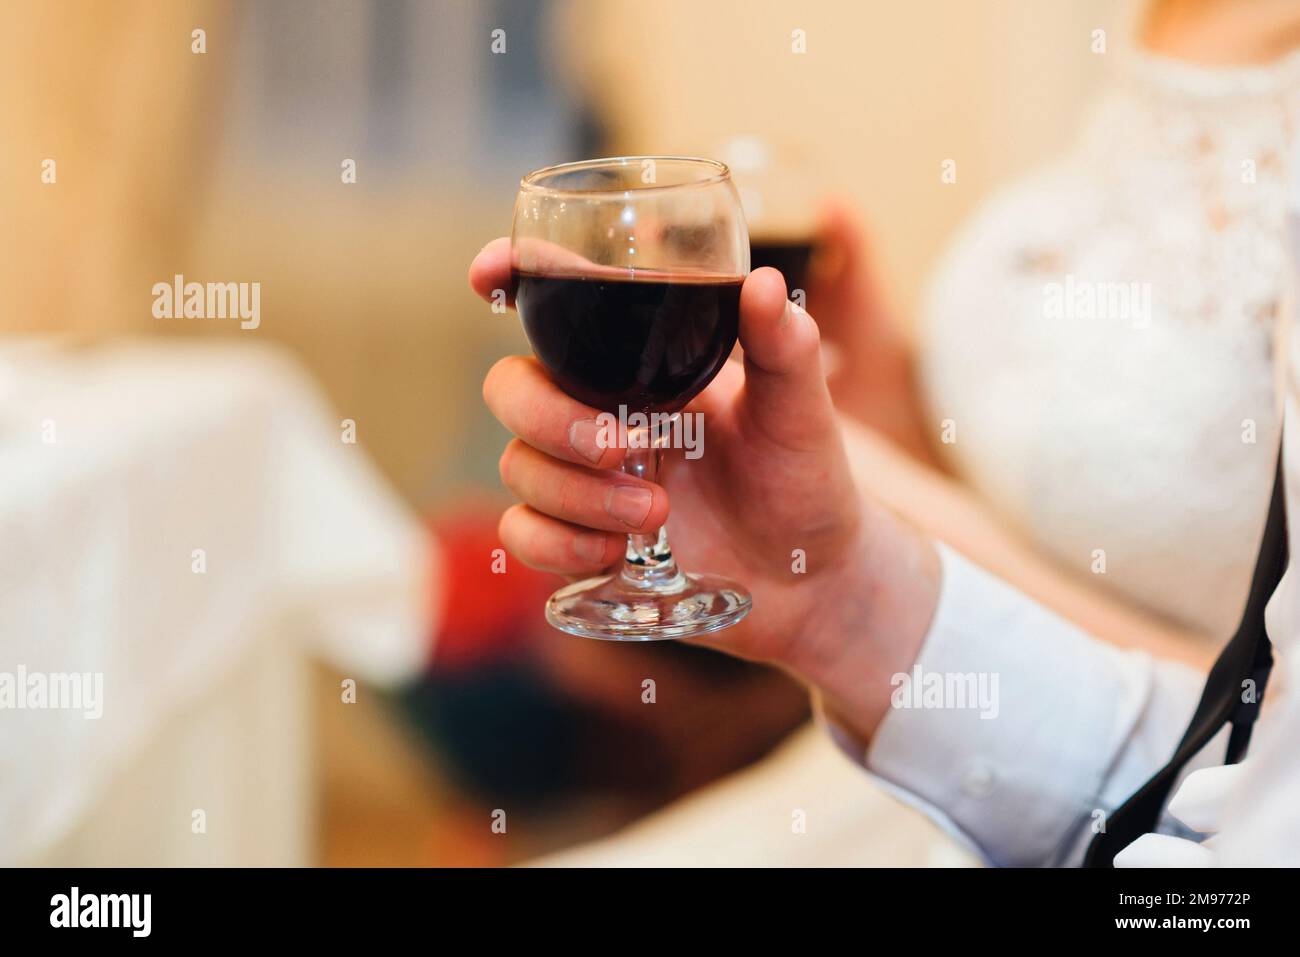 glass of red wine in the hand of a man close-up with a blurred background Stock Photo